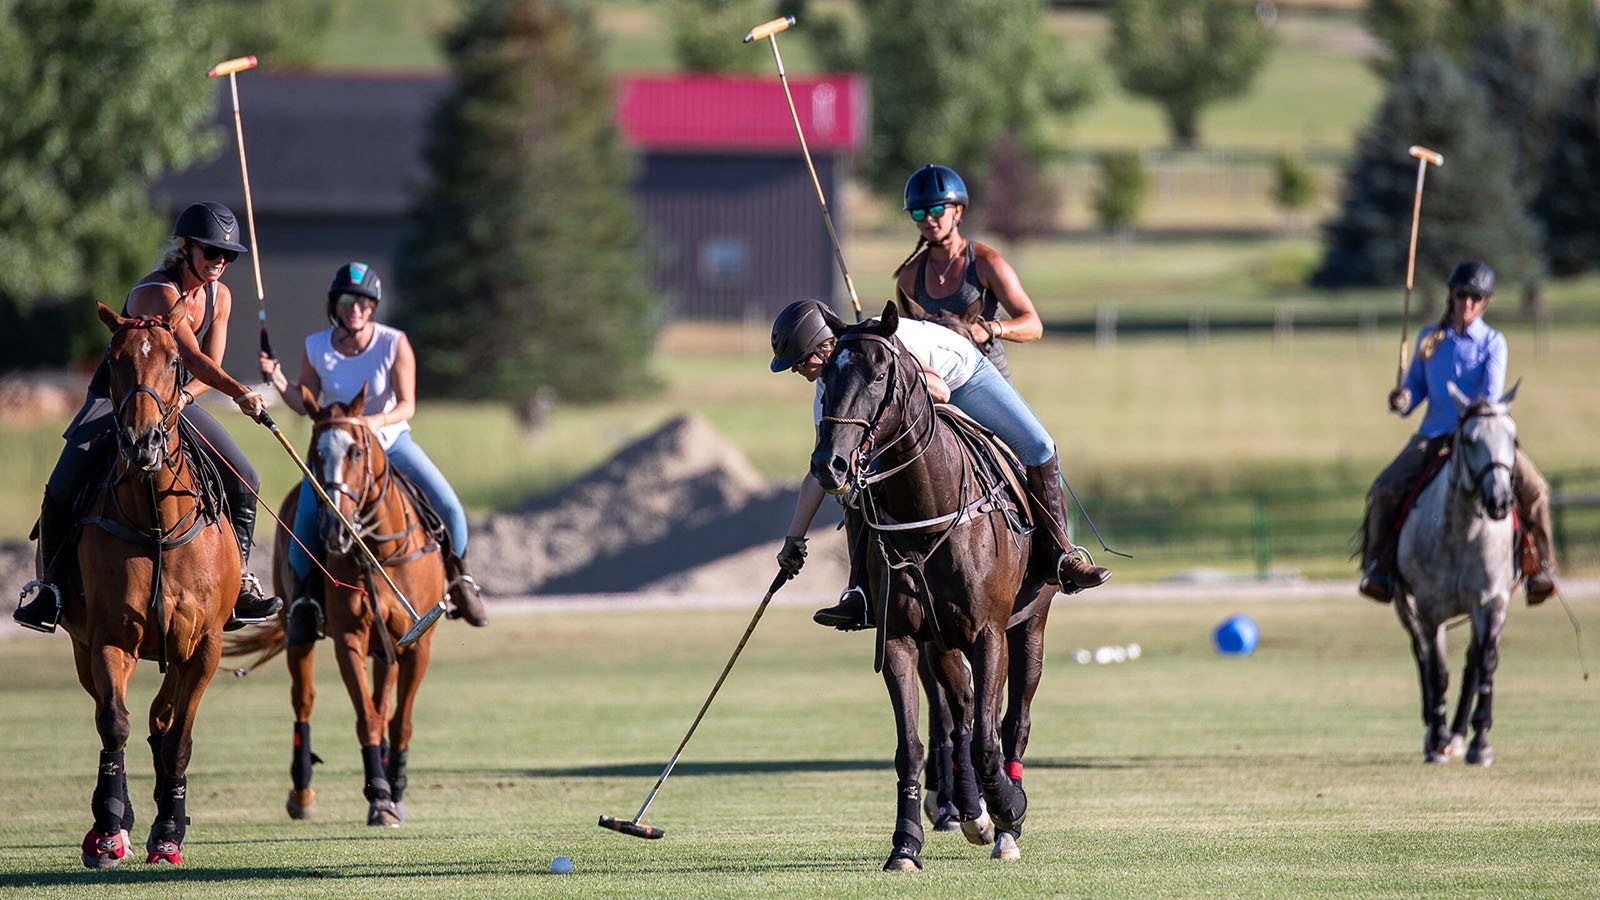 Some of the polo horses that compete at the Big Horn Polo Club in Sheridan, Wyoming, have been flown into the country from South America.